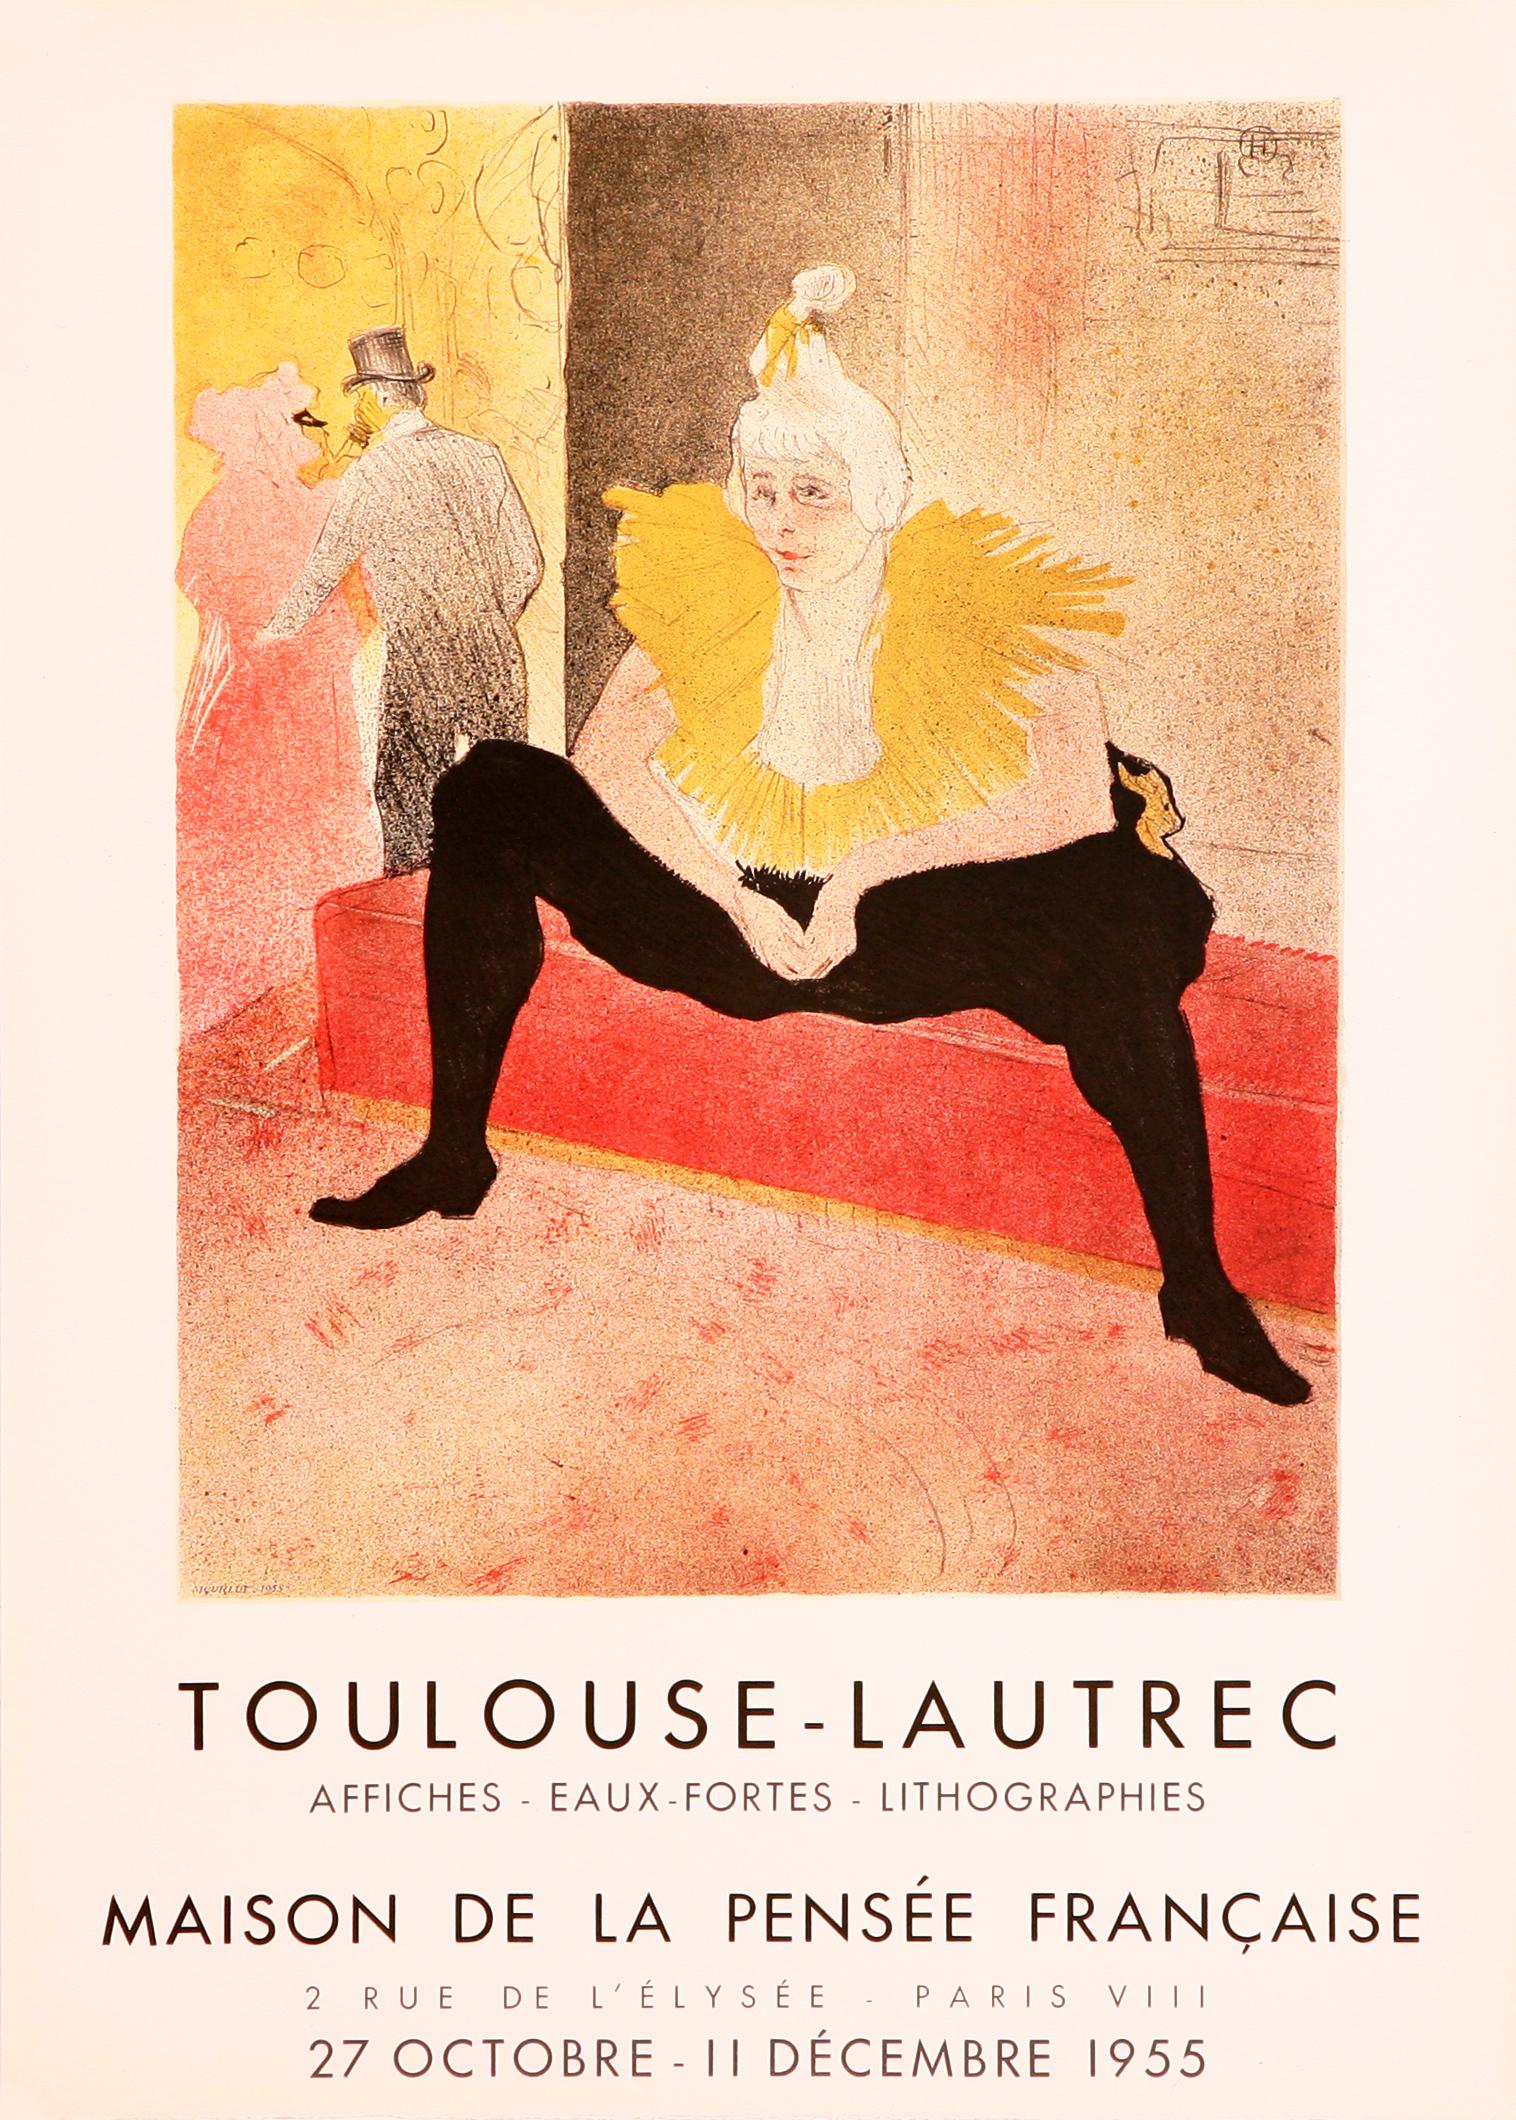 This lithographic poster was designed after Henri de Toulouse-Lautrec for an exhibition of his prints at the Maison de La pensée Française, Paris in 1955. This poster is based on an original lithograph from 1896 entitled "The Seated Clowness".

The